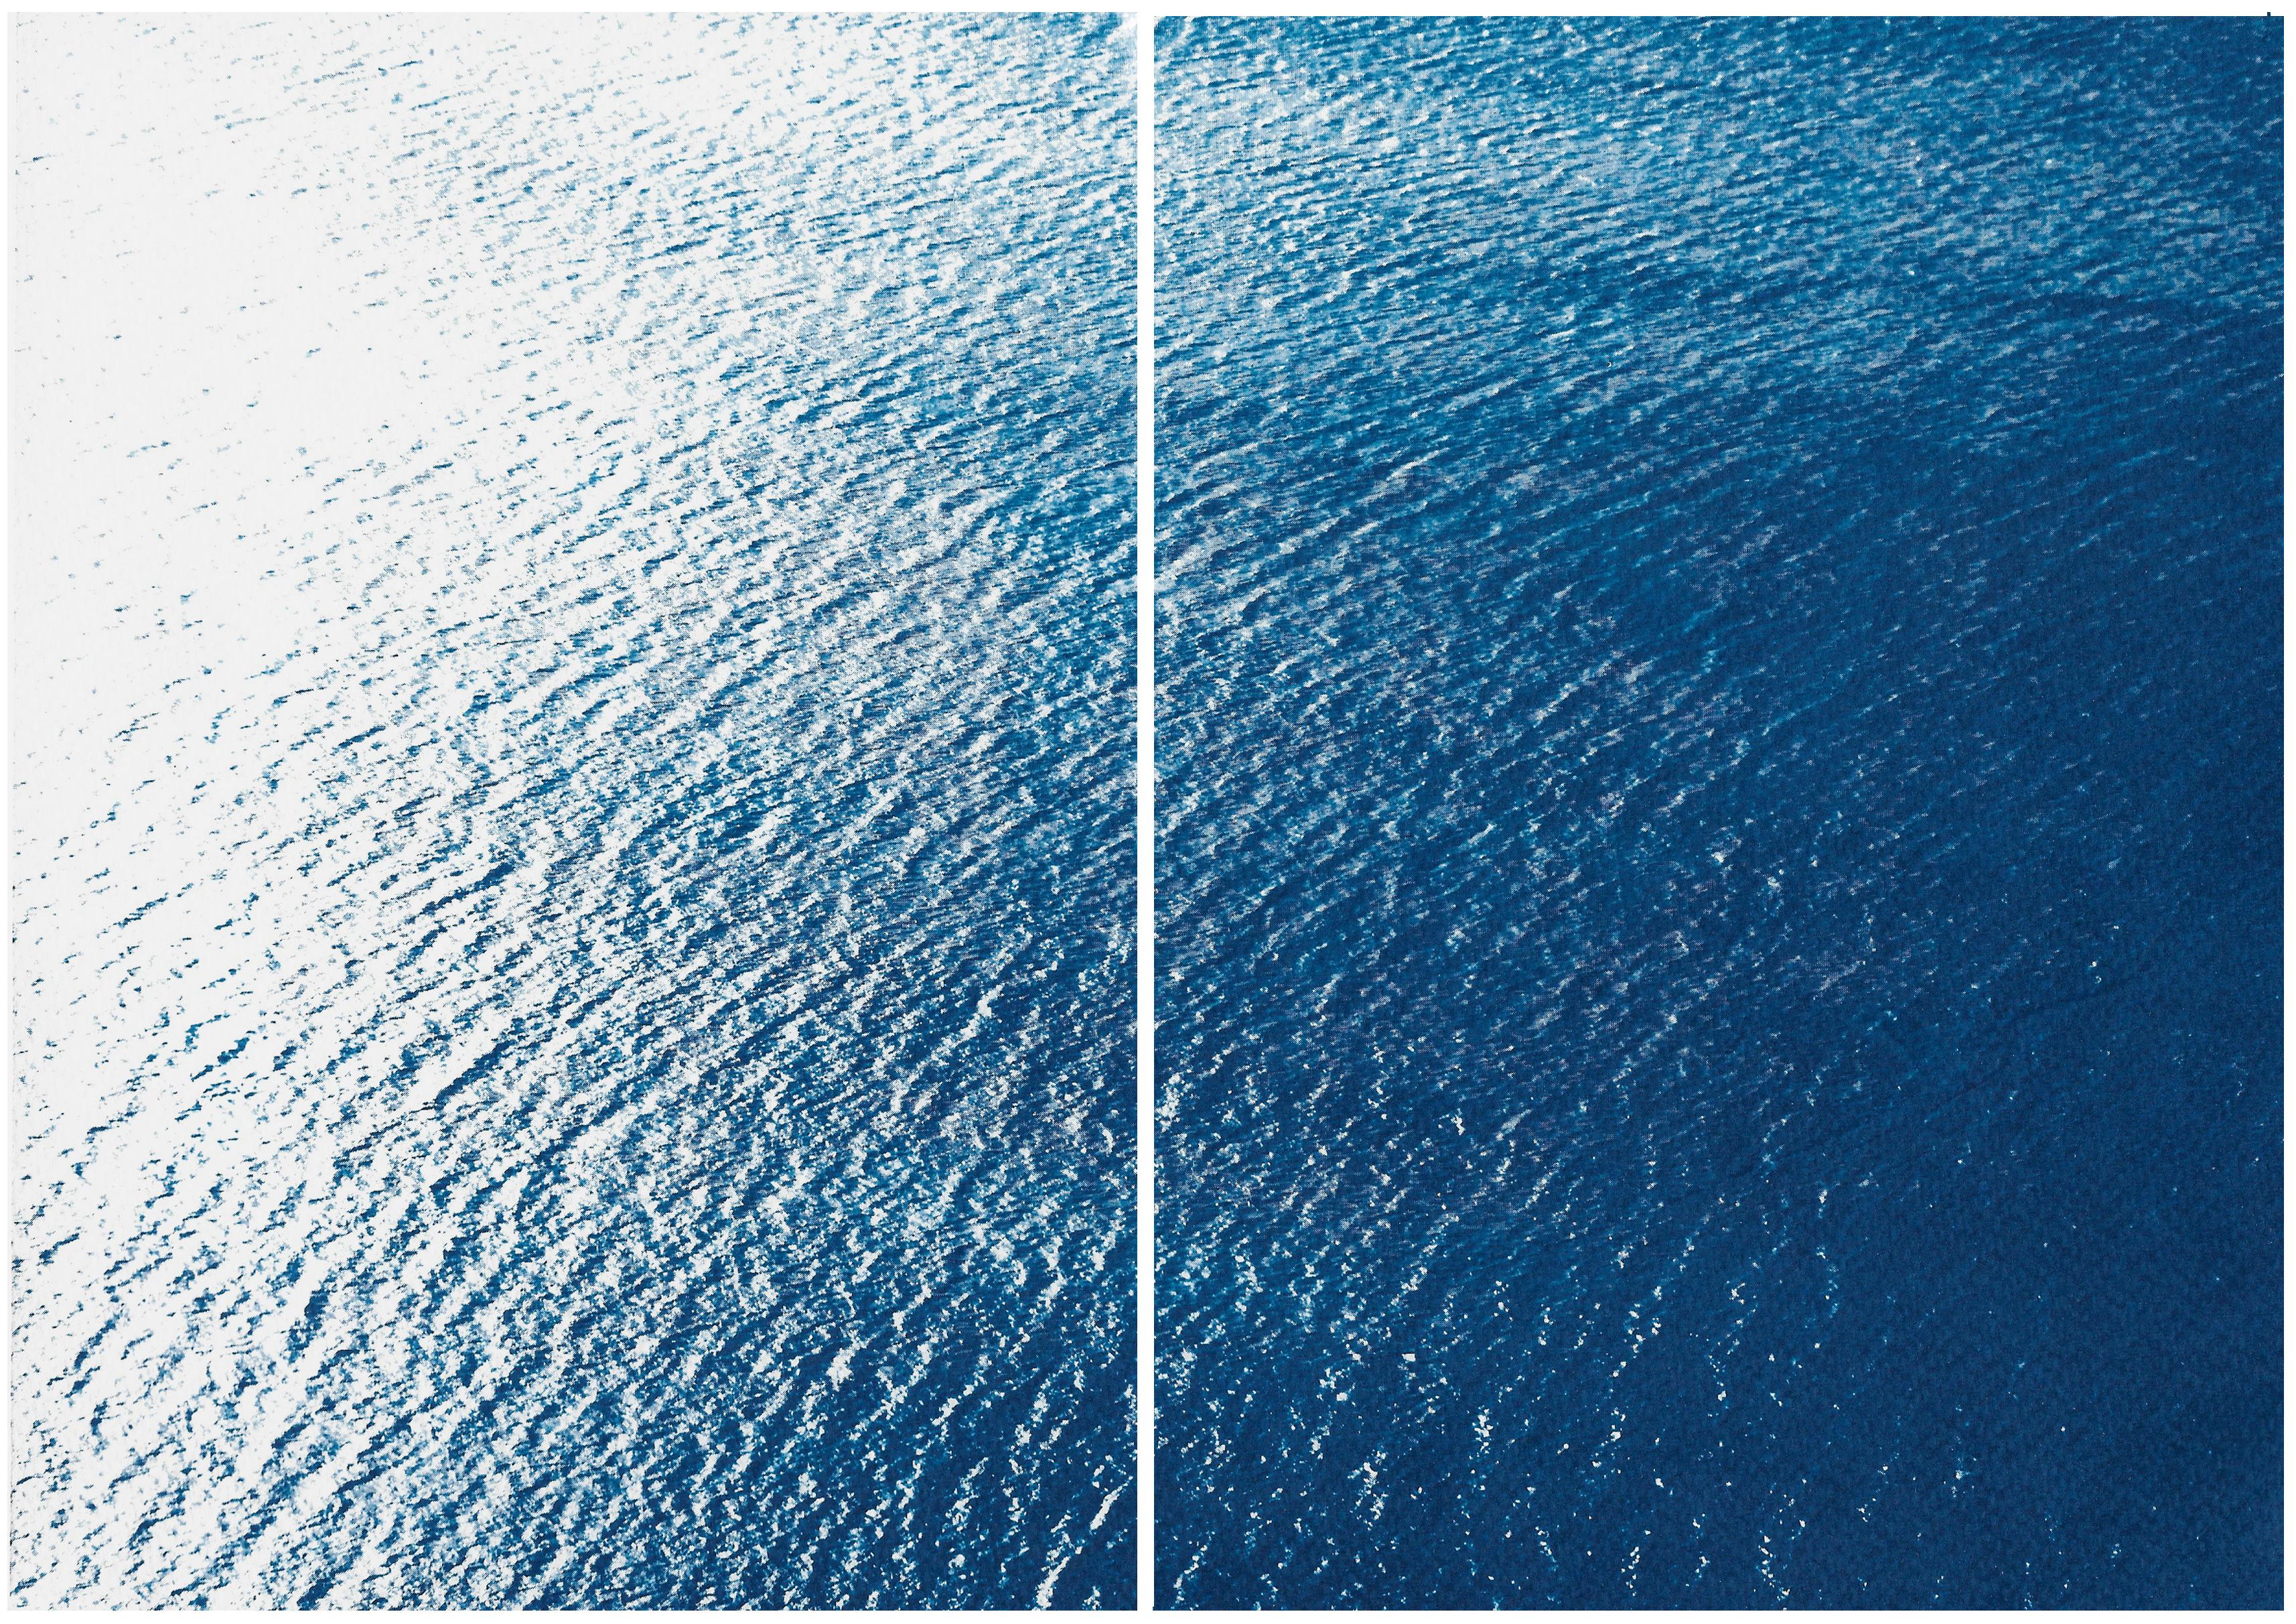 Kind of Cyan Landscape Painting - Nautical Diptych of Smooth Bay in the Mediterranean, Zen Waters Cyanotype, Paper